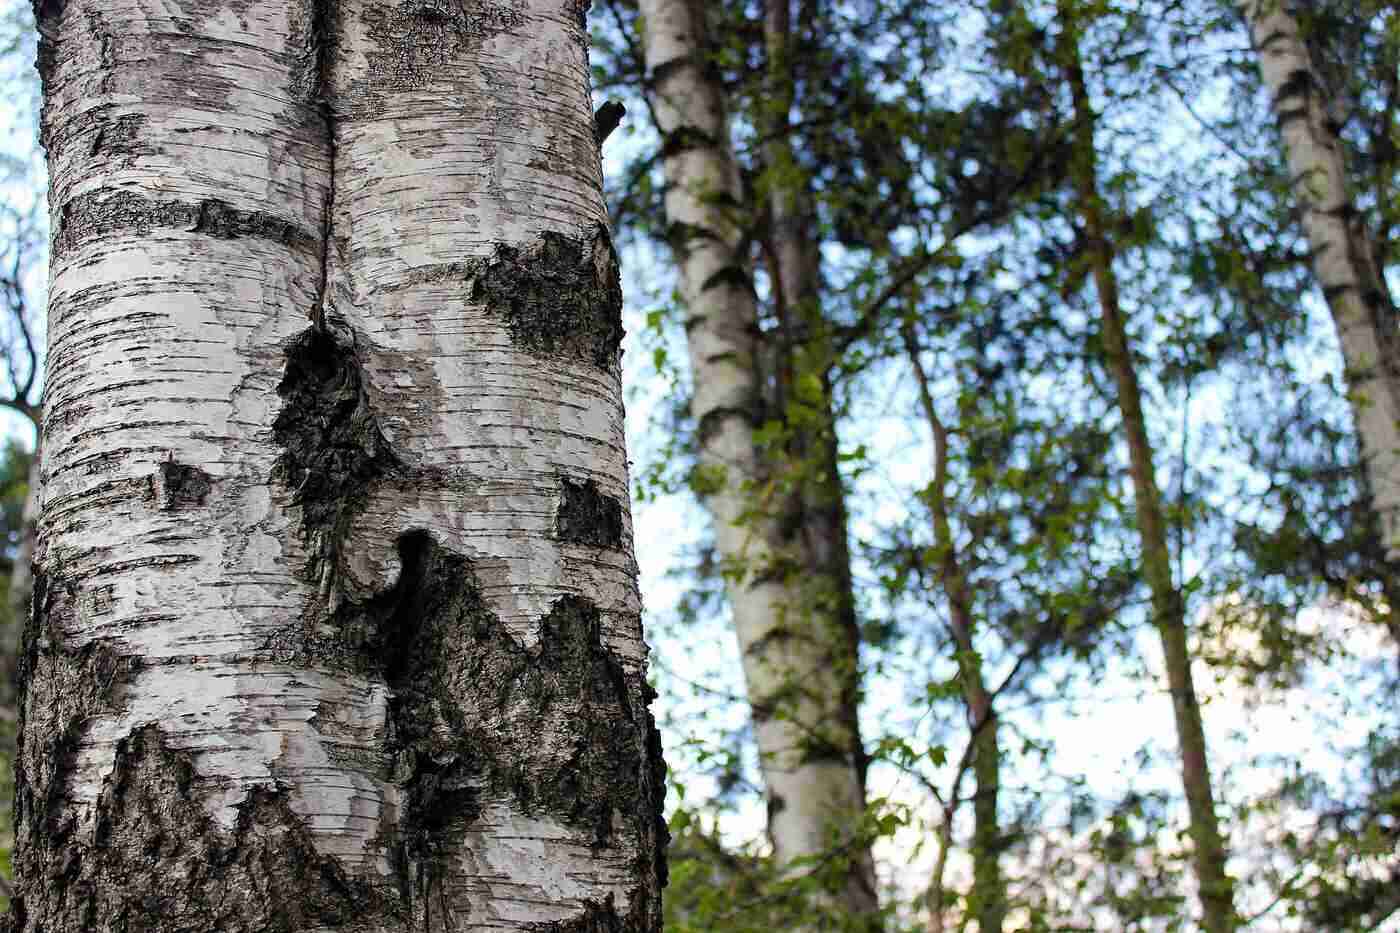 Thick birch tree trunk - How to hang a swing from a tree without branches